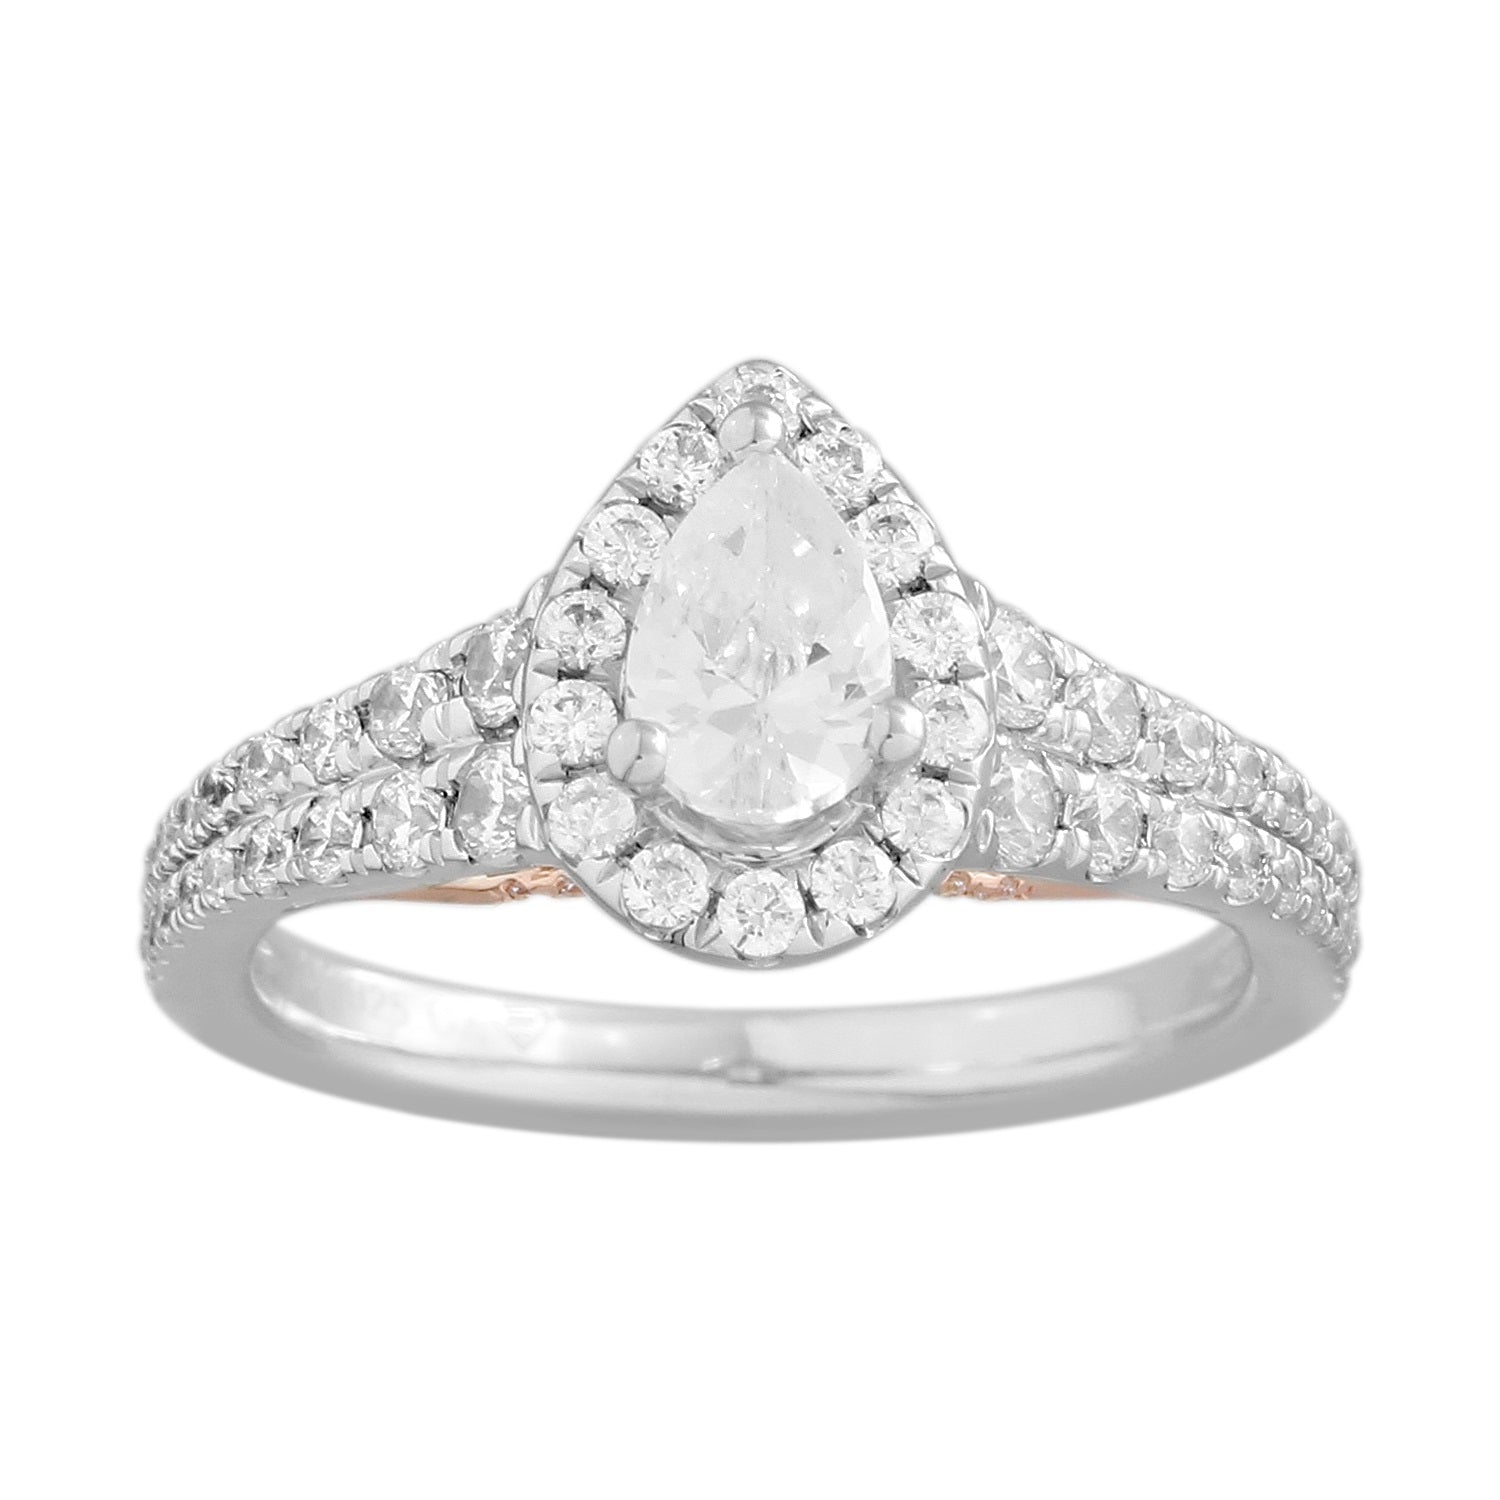 Double Prong Halo Diamond Engagement Ring made in 14k White and Rose gold-Pear